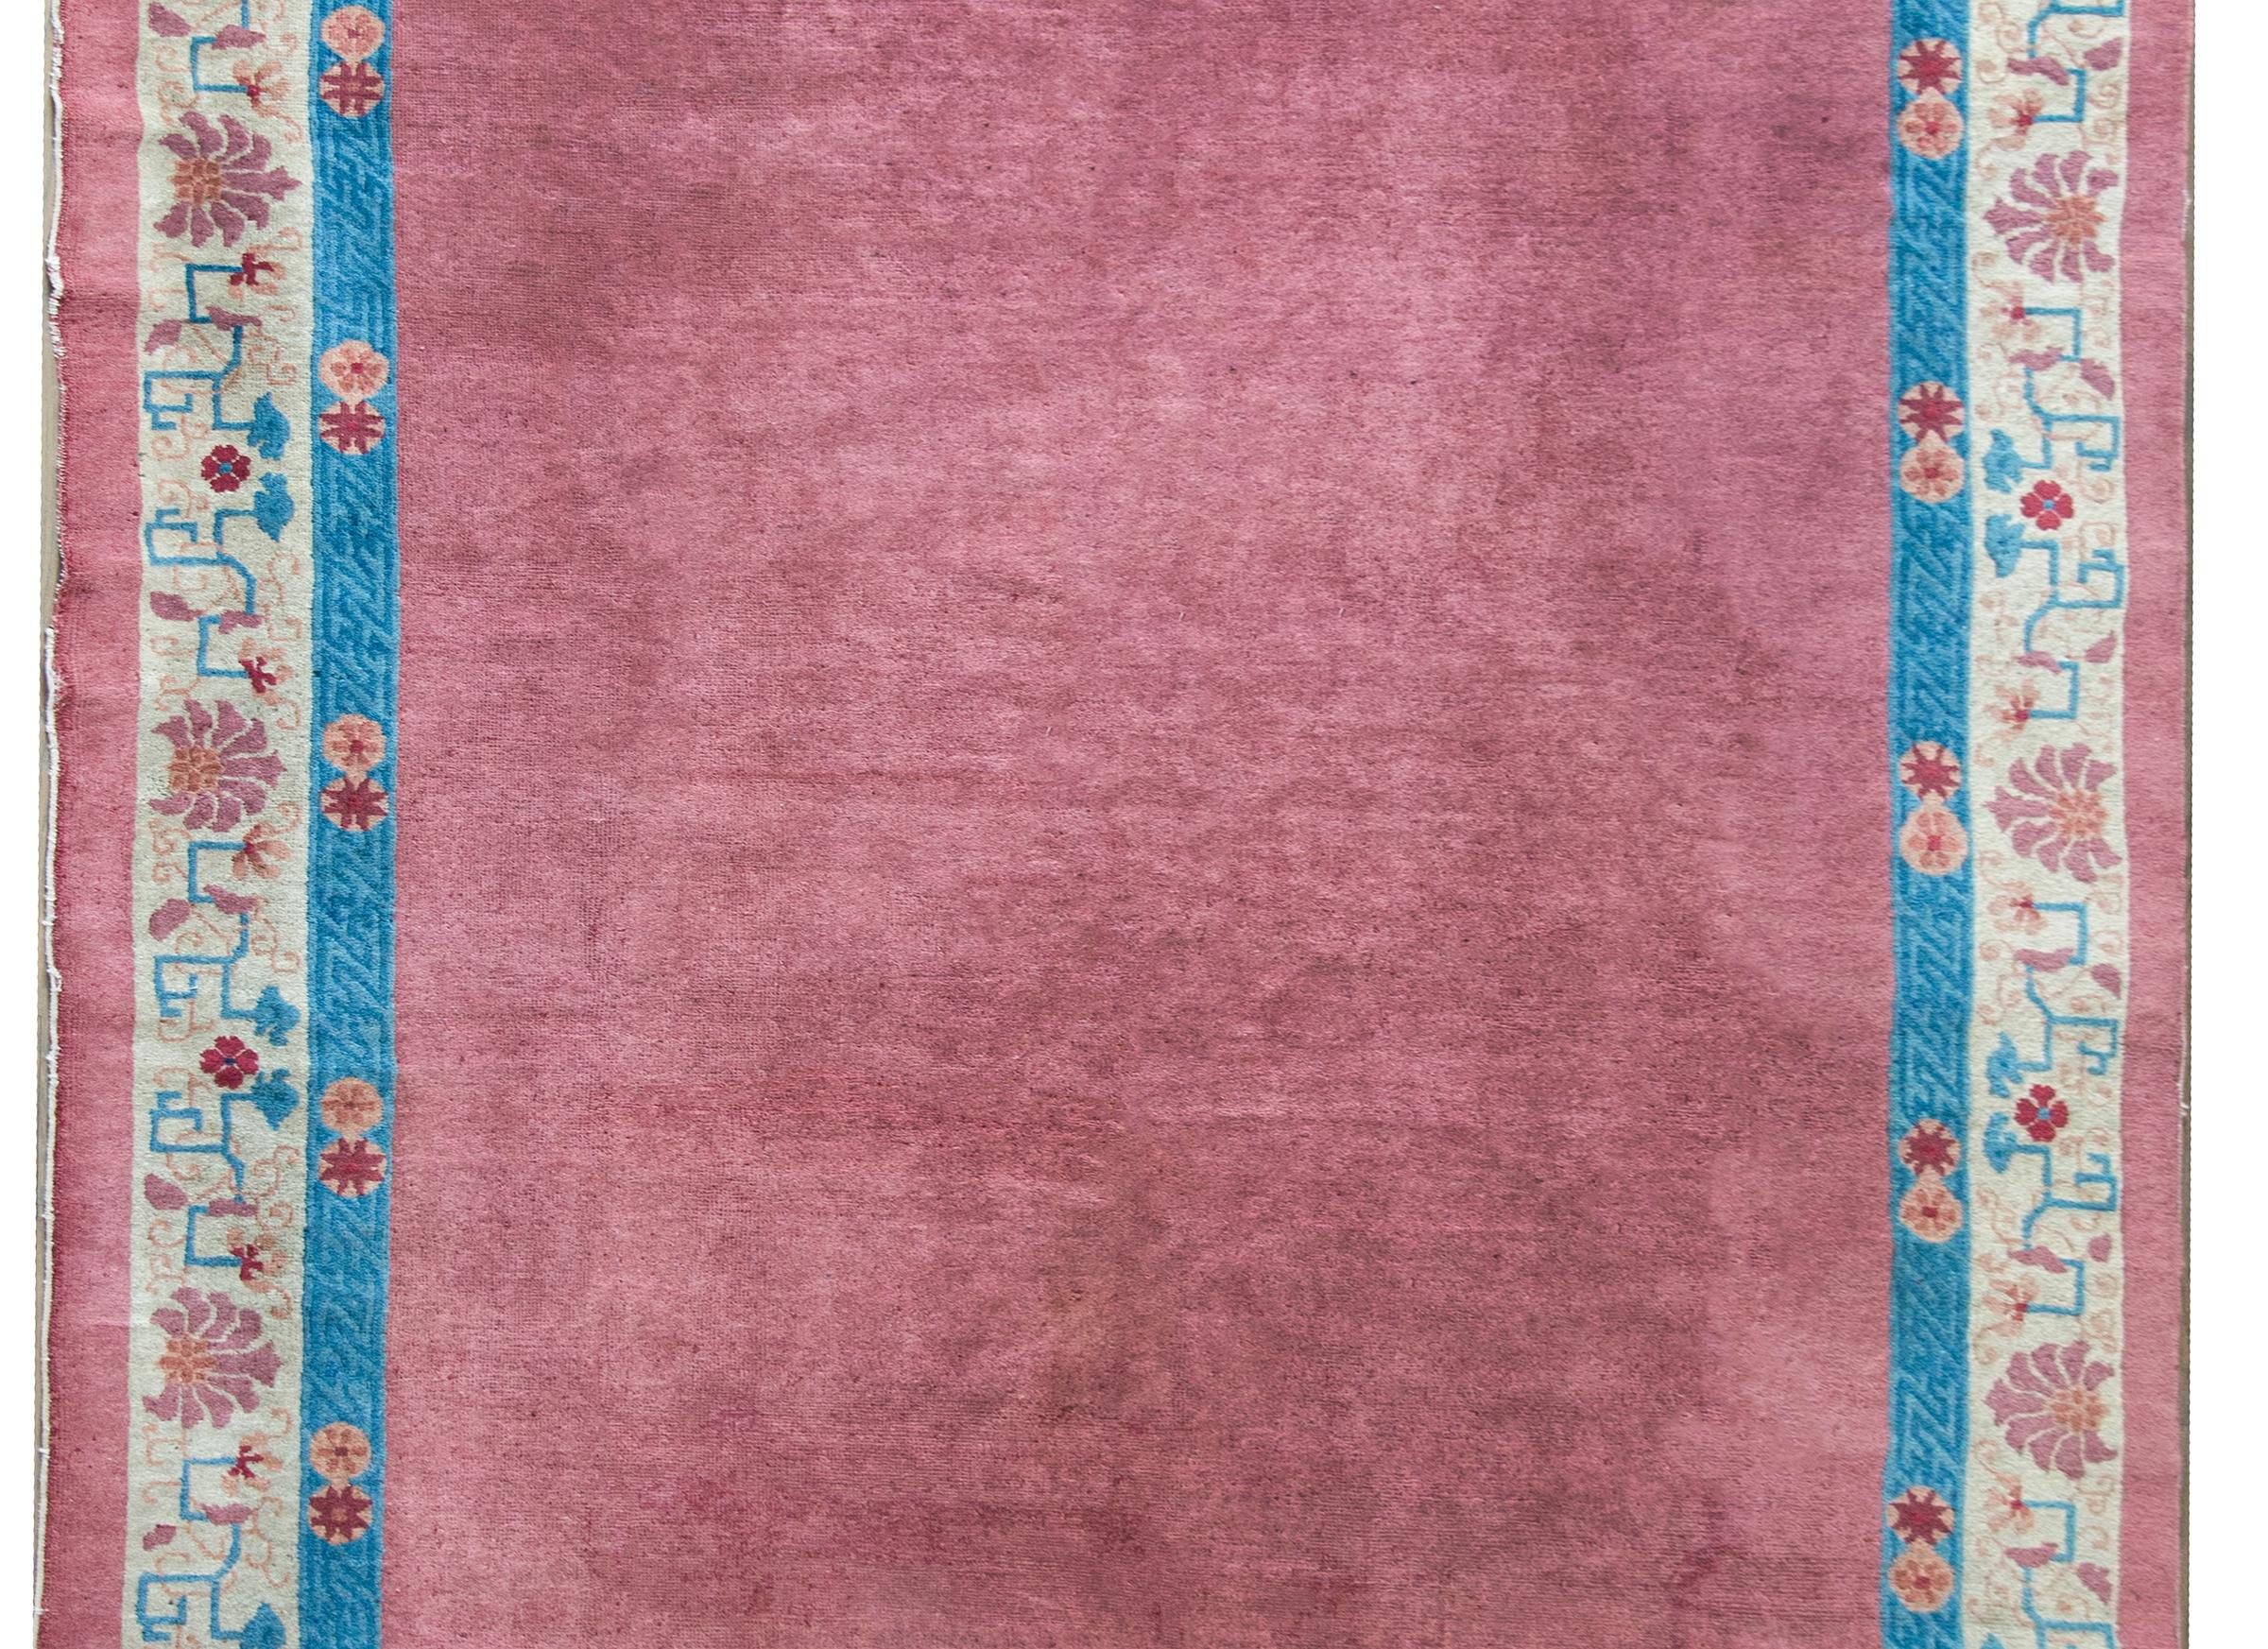 A wonderful early 20th century Chinese Feti rug with a solid mauve central field surrounded by a border with an indigo meandering motif and repeated floral inner stripe and a wide repeated floral and stylized scrolling dragon outer border.